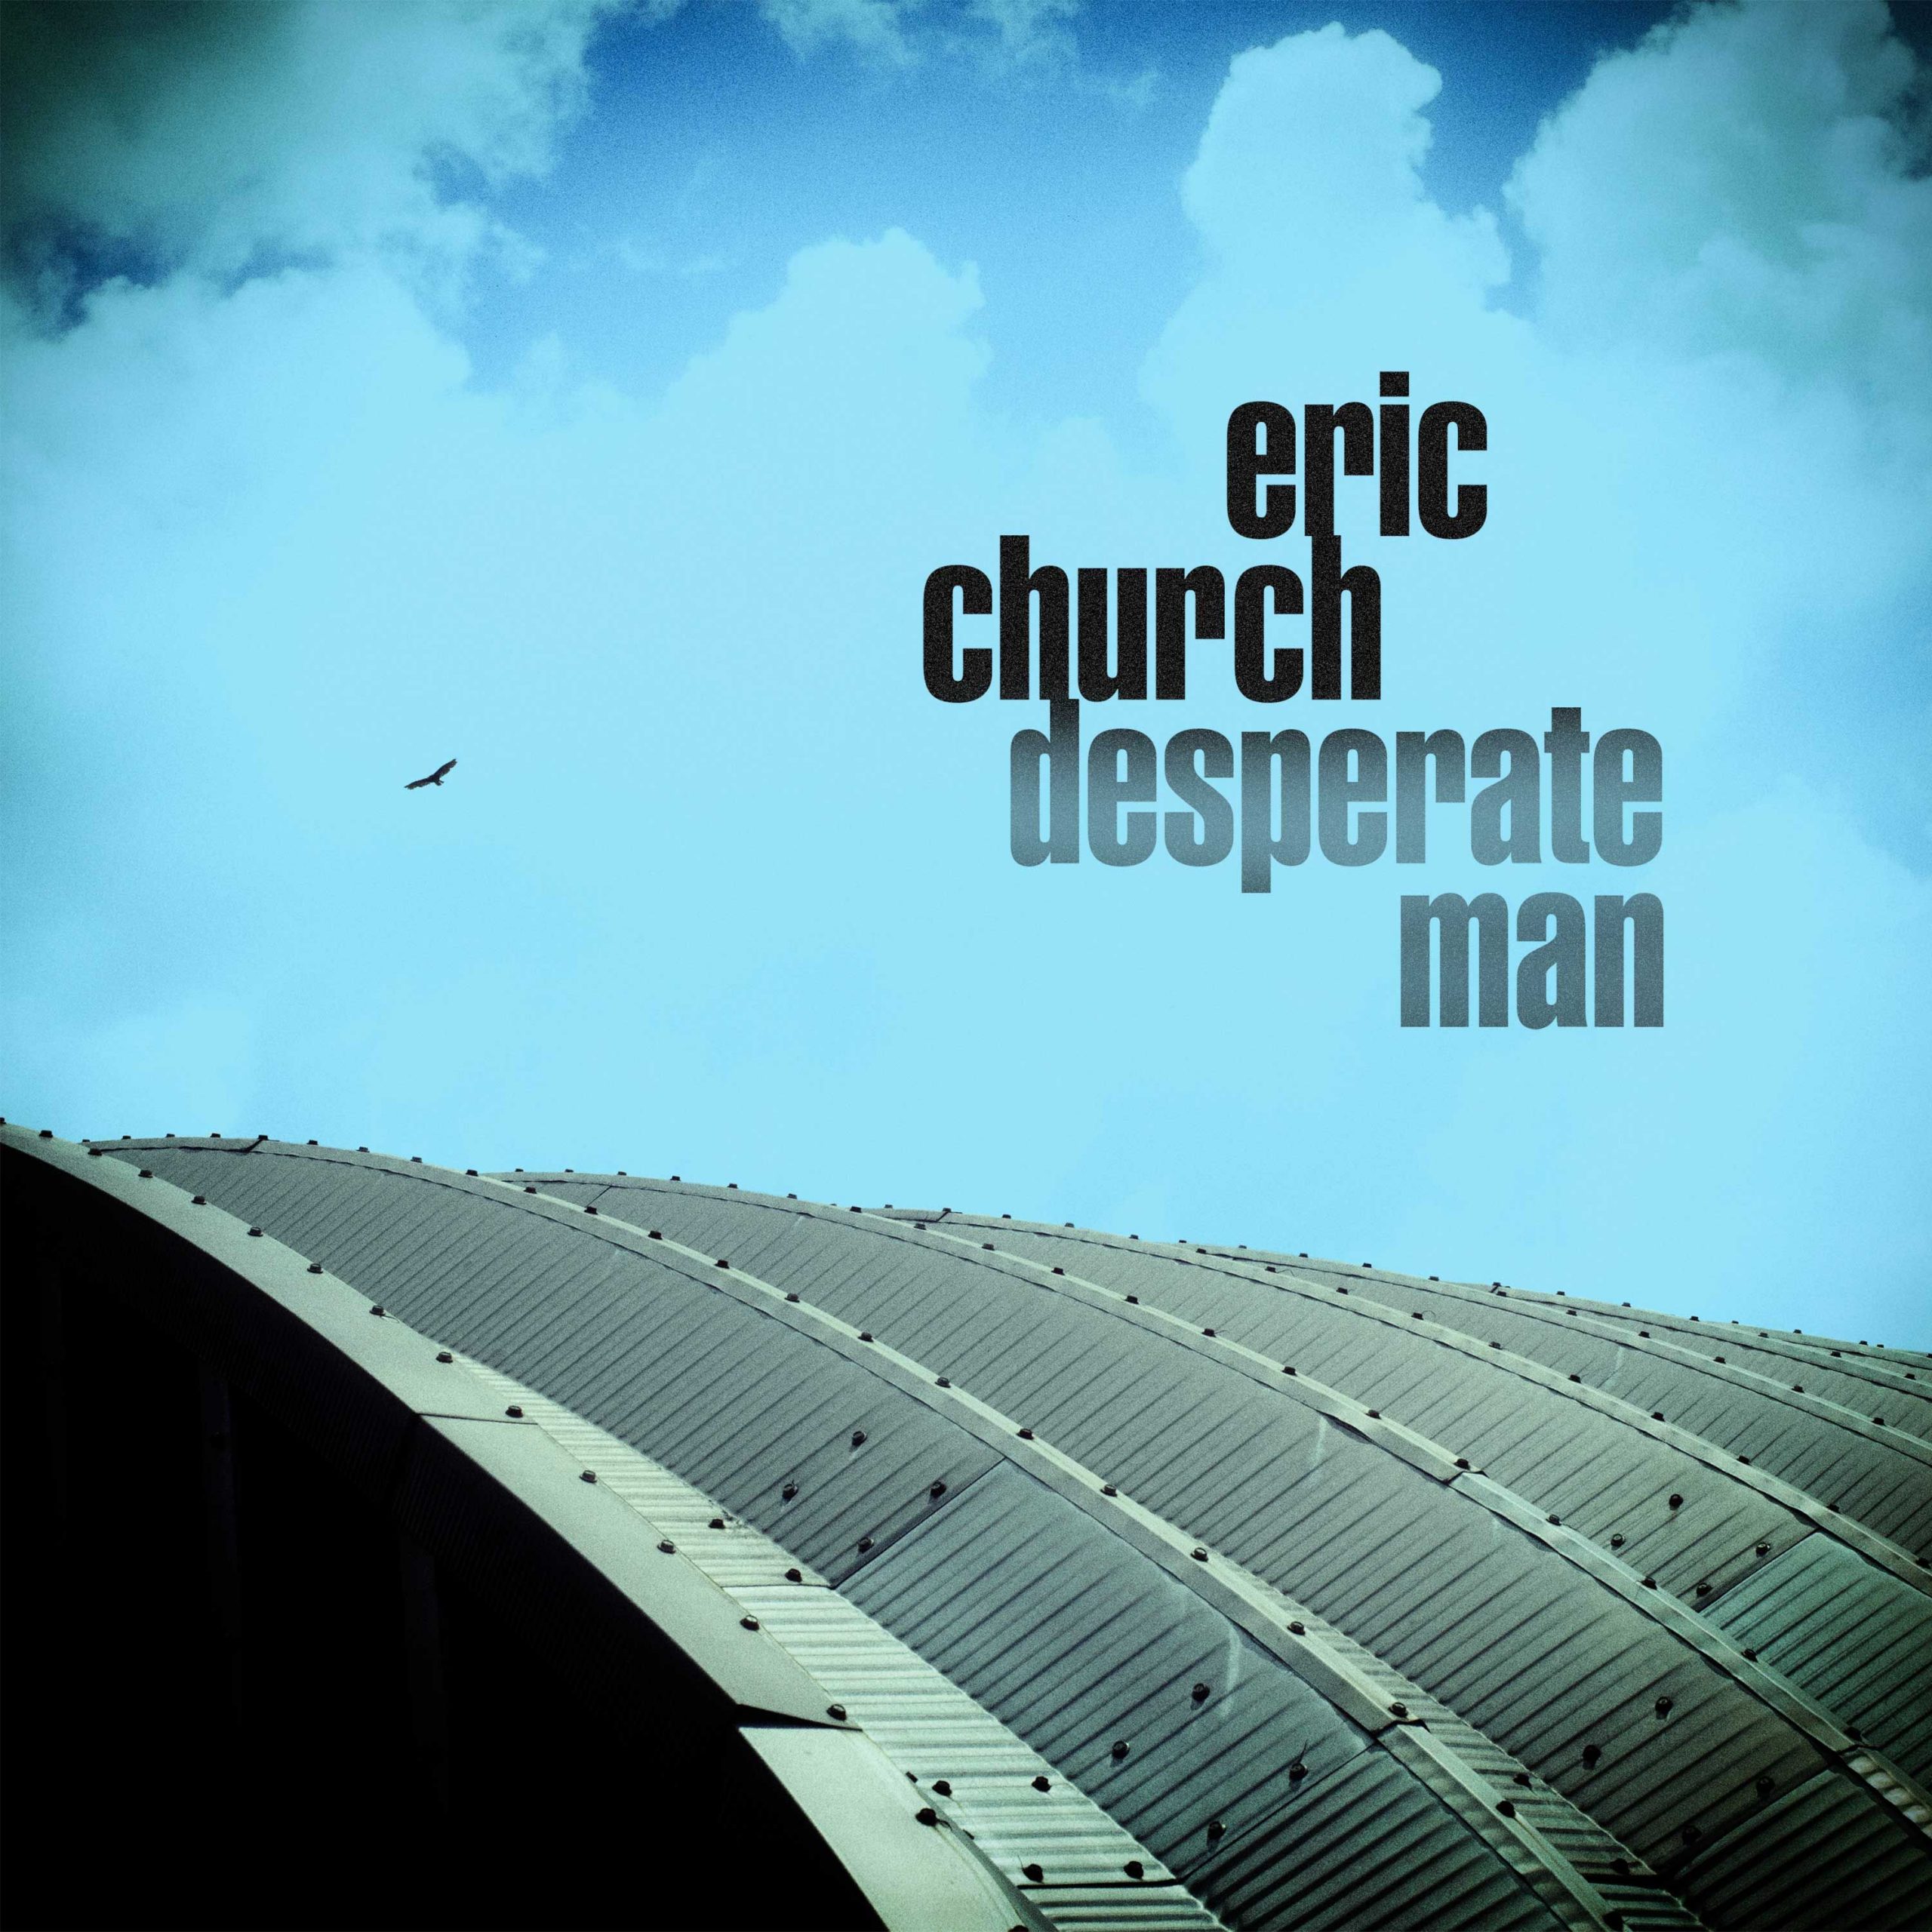 ERIC CHURCH’S “DESPERATE MAN” MUSIC VIDEO TO PREMIERE EXCLUSIVELY ON AMAZON MUSIC MONDAY, JULY 16